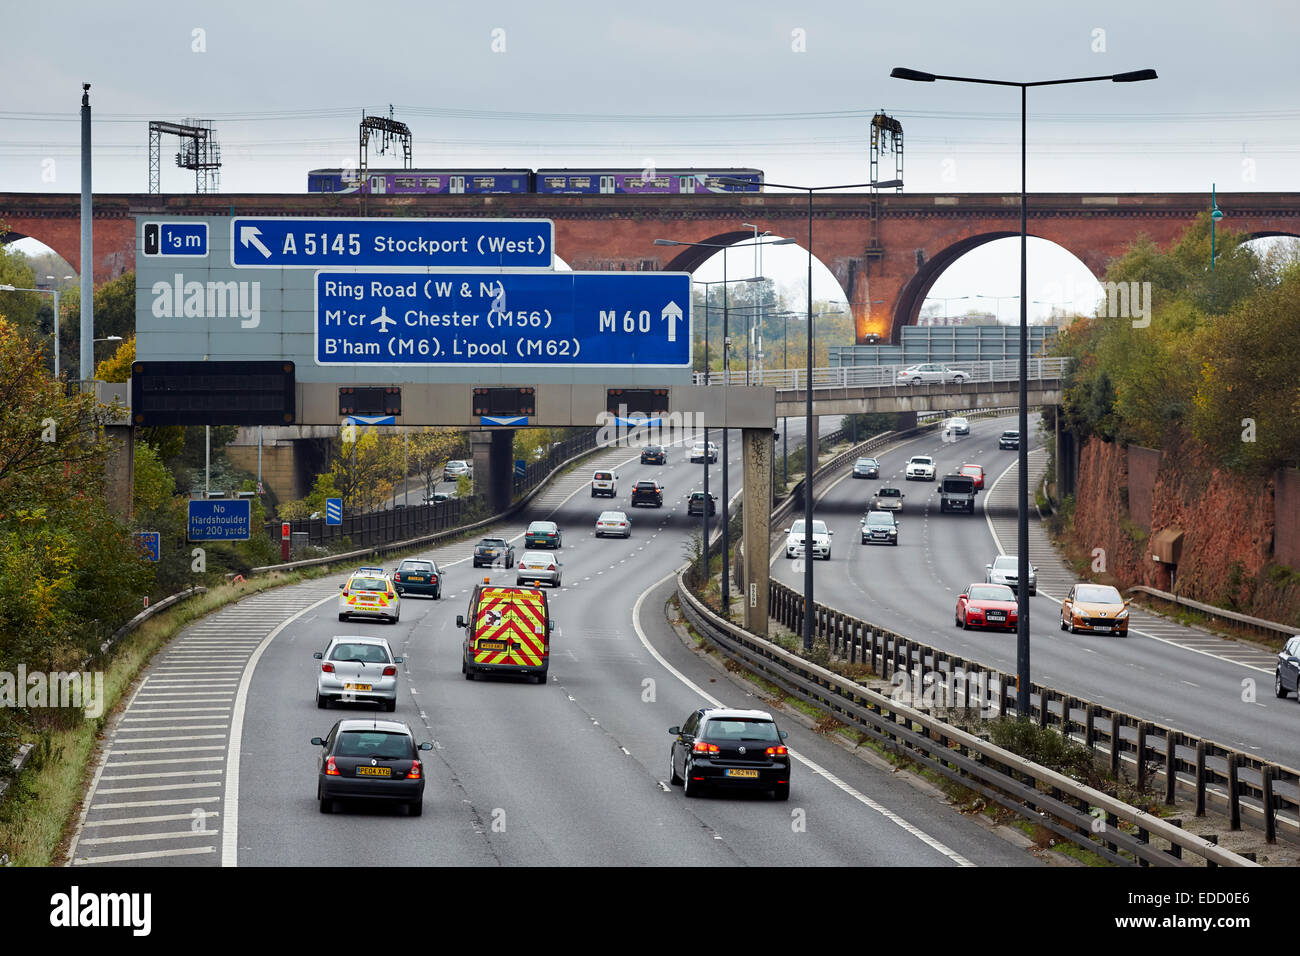 The M60 (was M63) motorway running through Stockport, with The railway viaduct in the distance Stock Photo